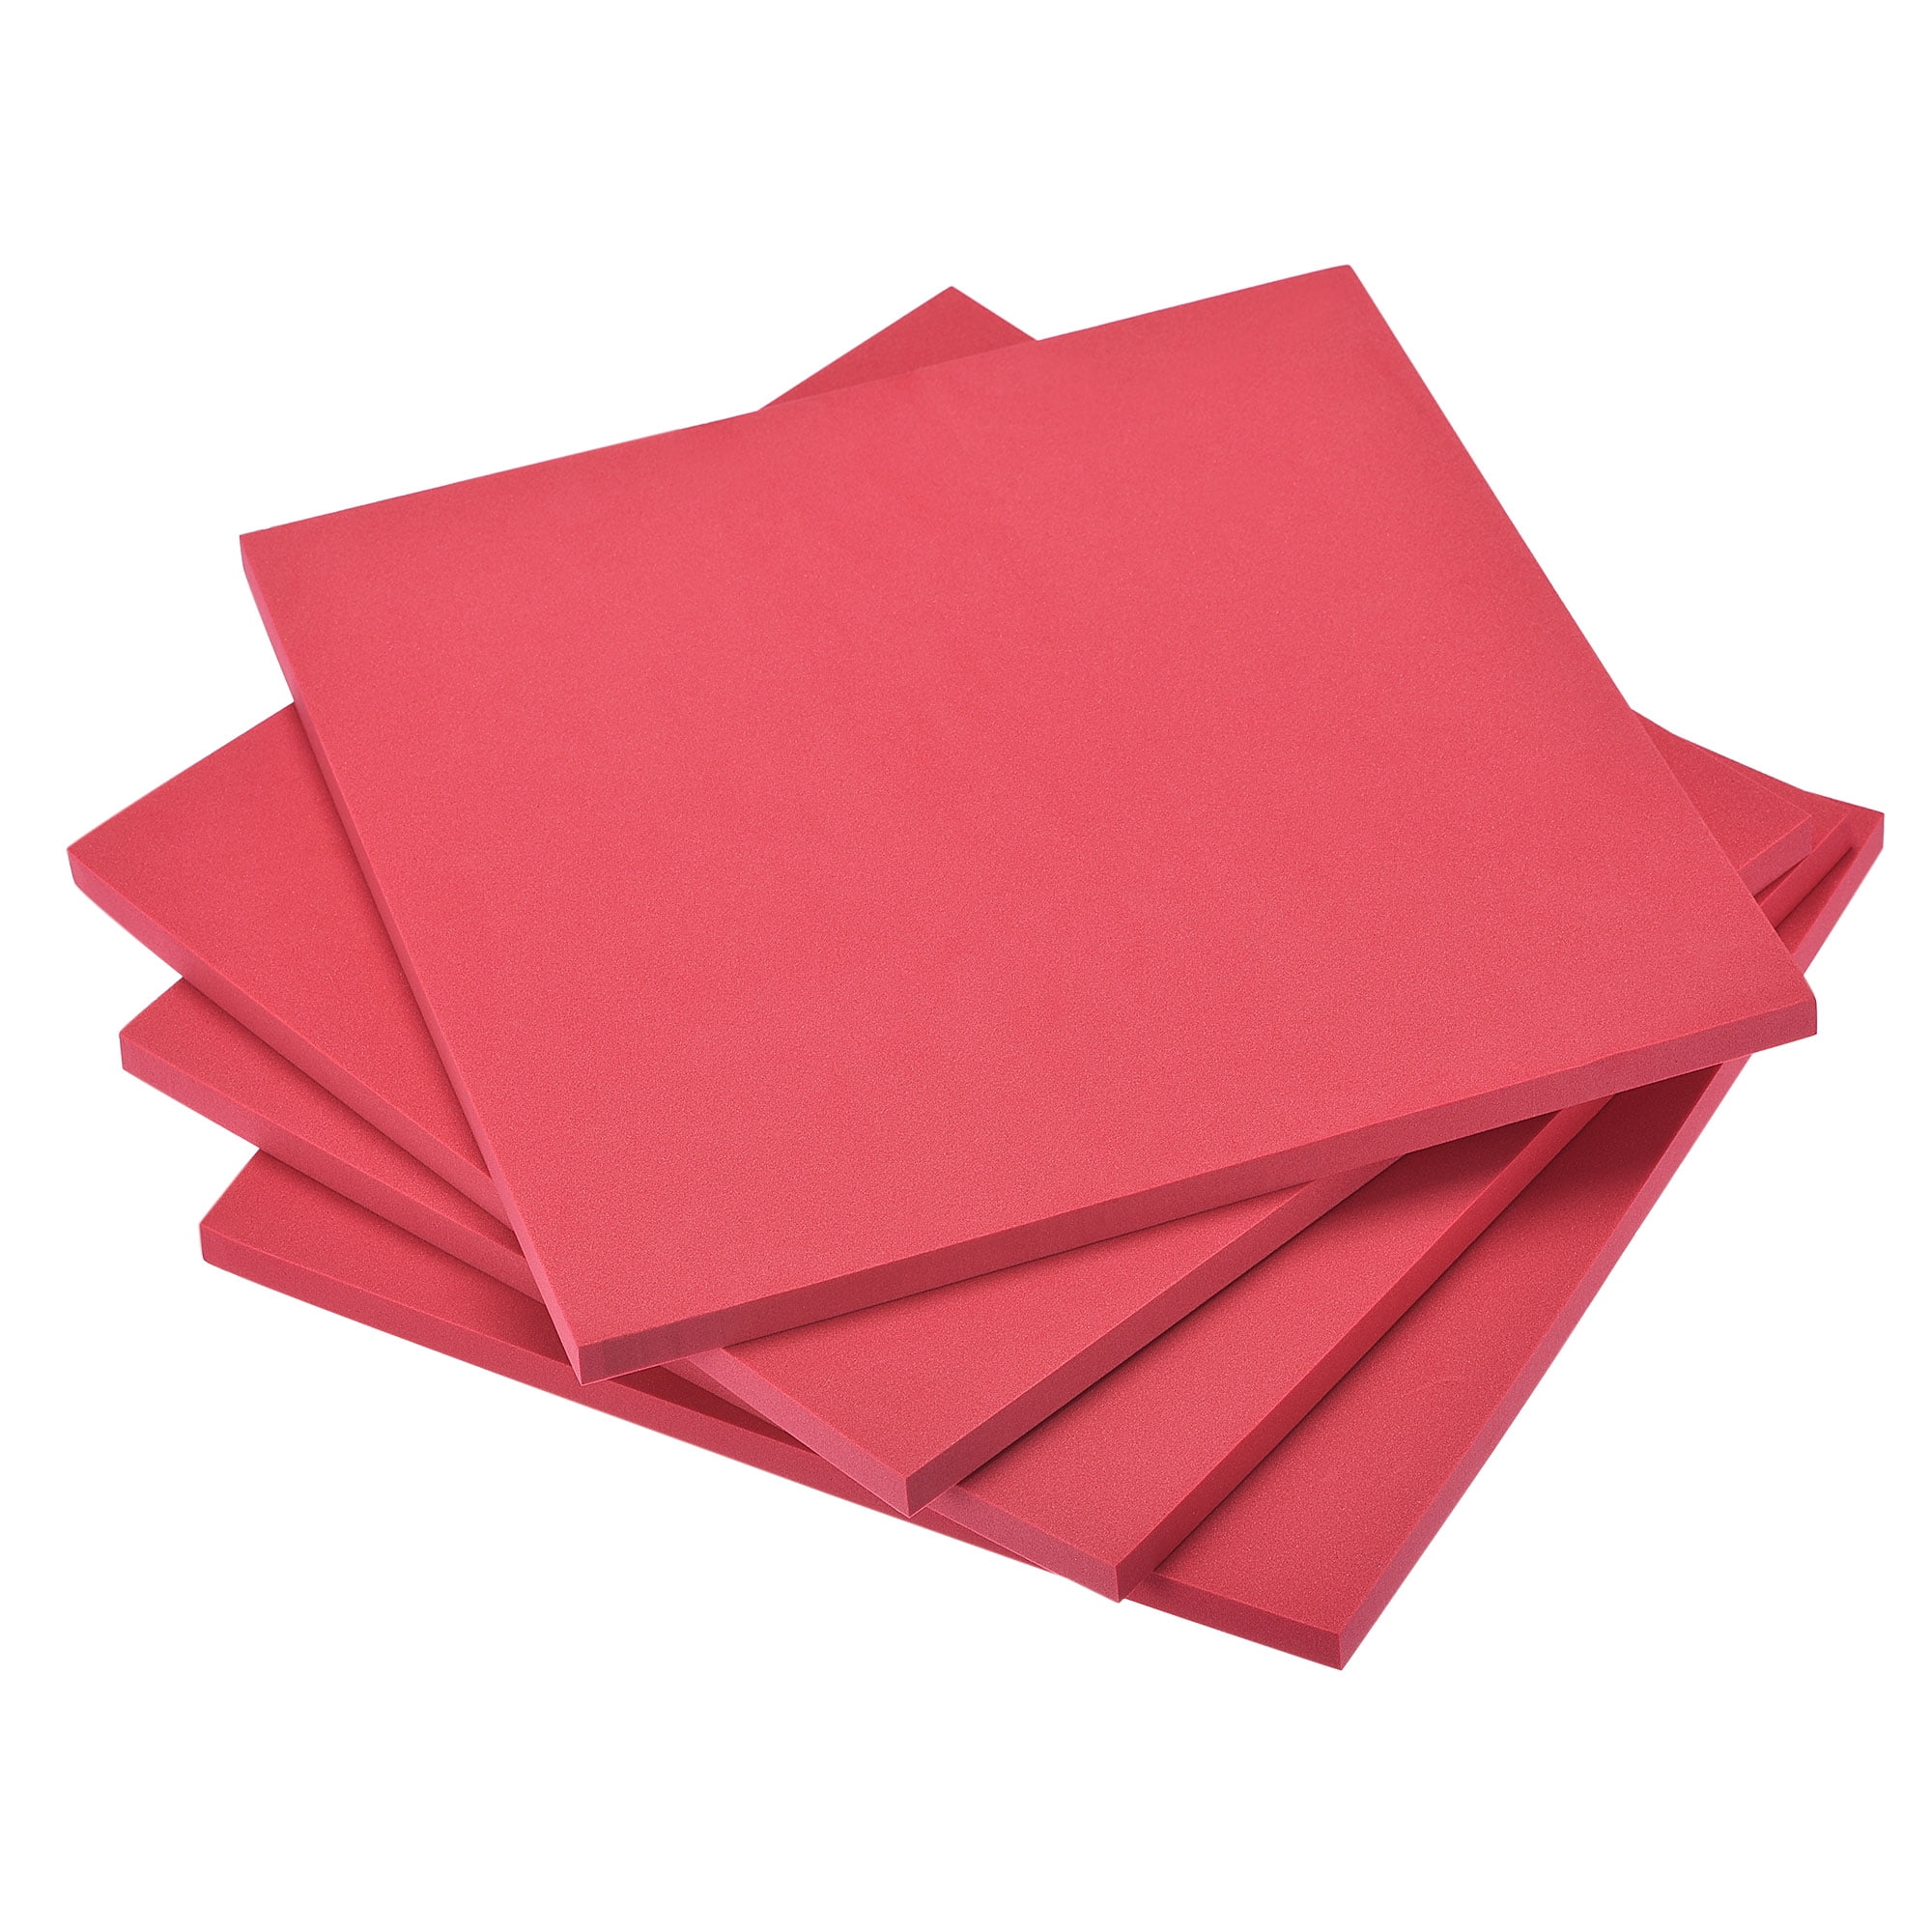 EVA Foam Sheets Red 9.8 Inch x 9.8 Inch 5mm Thick Crafts Foam Sheets Pack  of 6